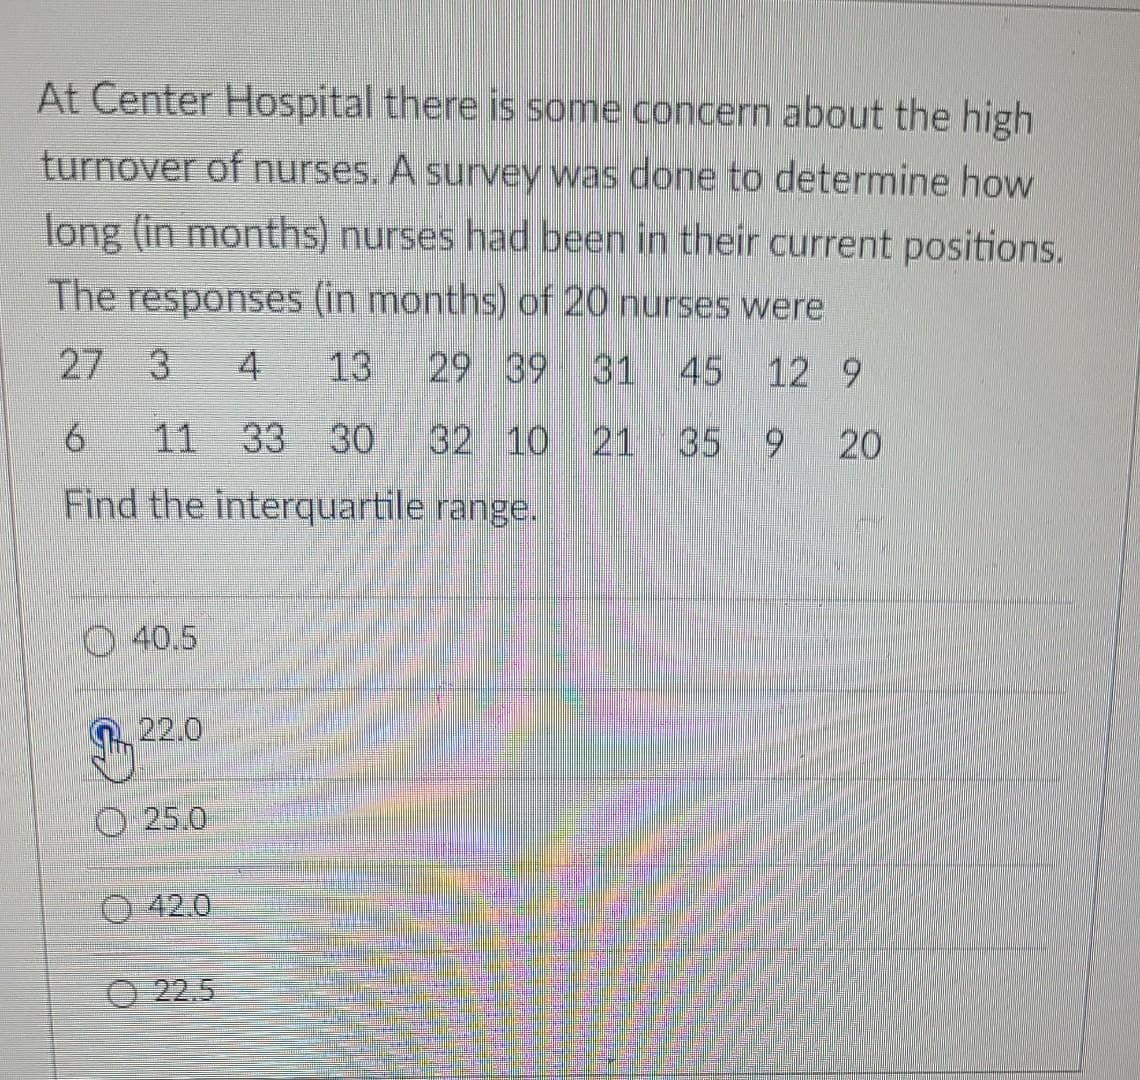 At Center Hospital there is some concern about the high
turnover of nurses. A survey was done to determine how
long (in months) nurses had been in their current positions.
The responses (in months) of 20 nurses were
27 3 4 13 29 39 31 45 12 9
6 11 33 30 32 10 21 35 9 20
Find the interquartile range.
40.5
22.0
25.0
42.0
22.5